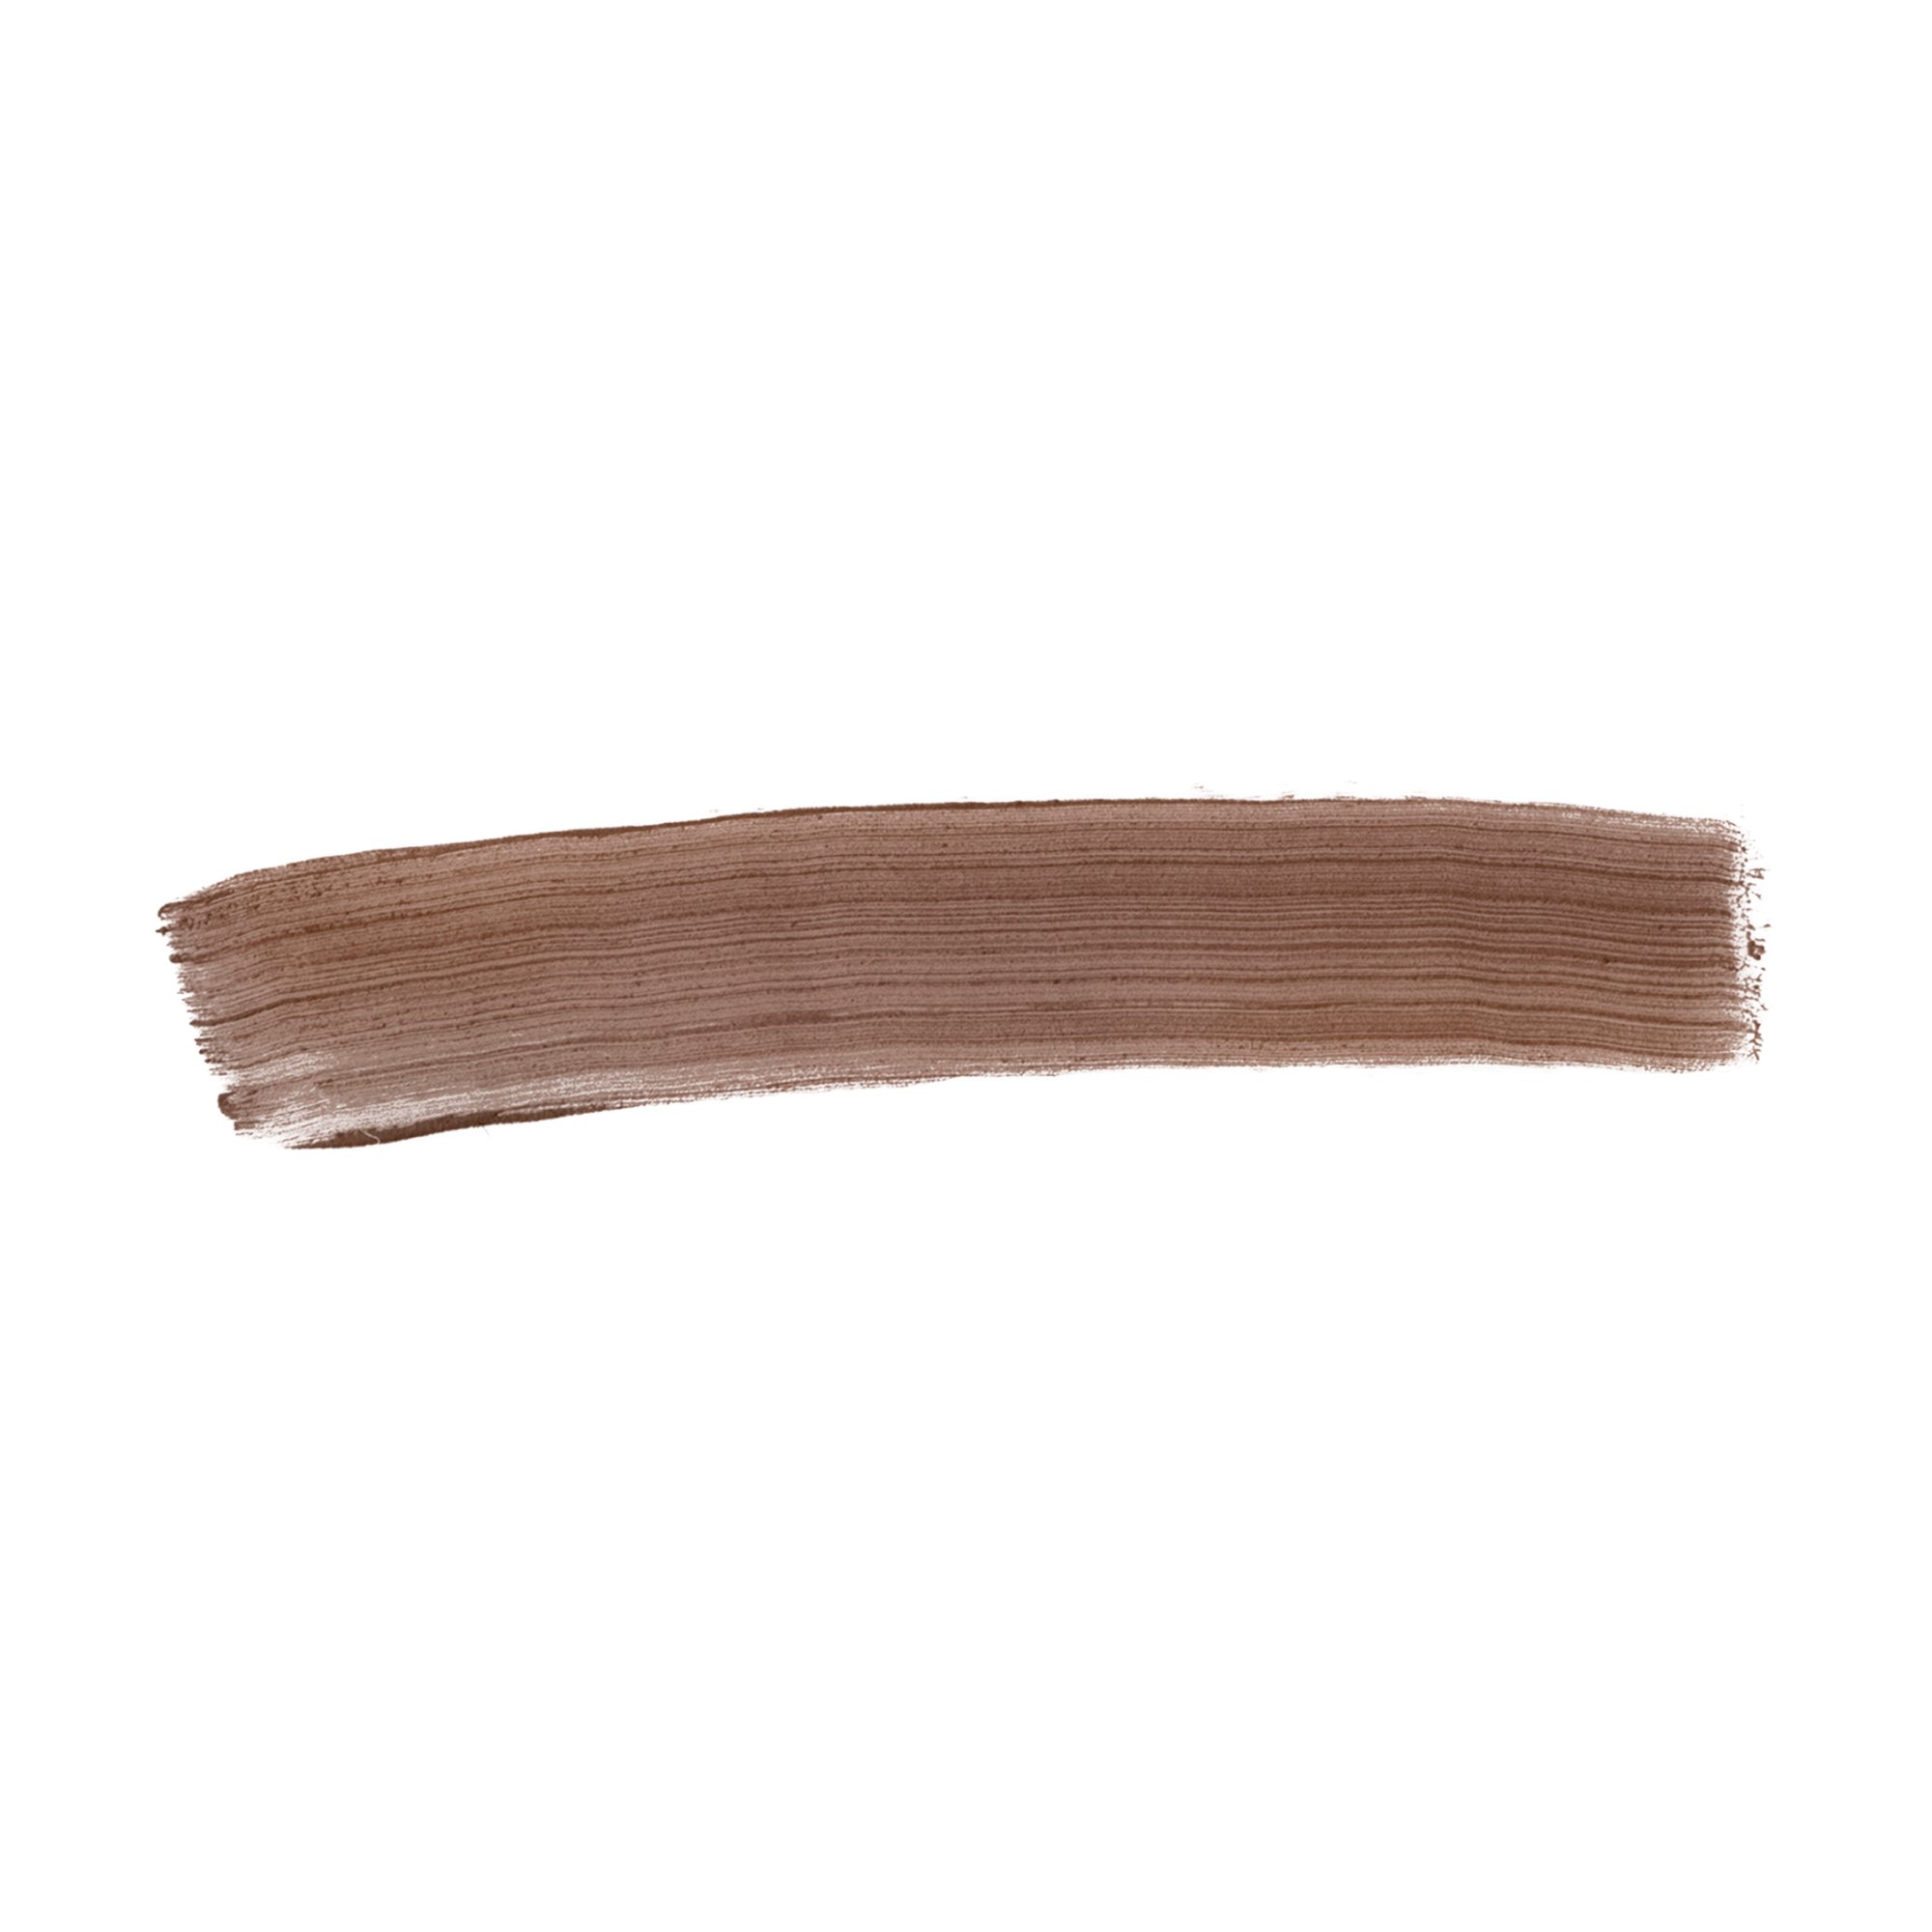 Benefit Cosmetics POWmade Brow Pomade In 03 -Warm light brown, Size: Full Size